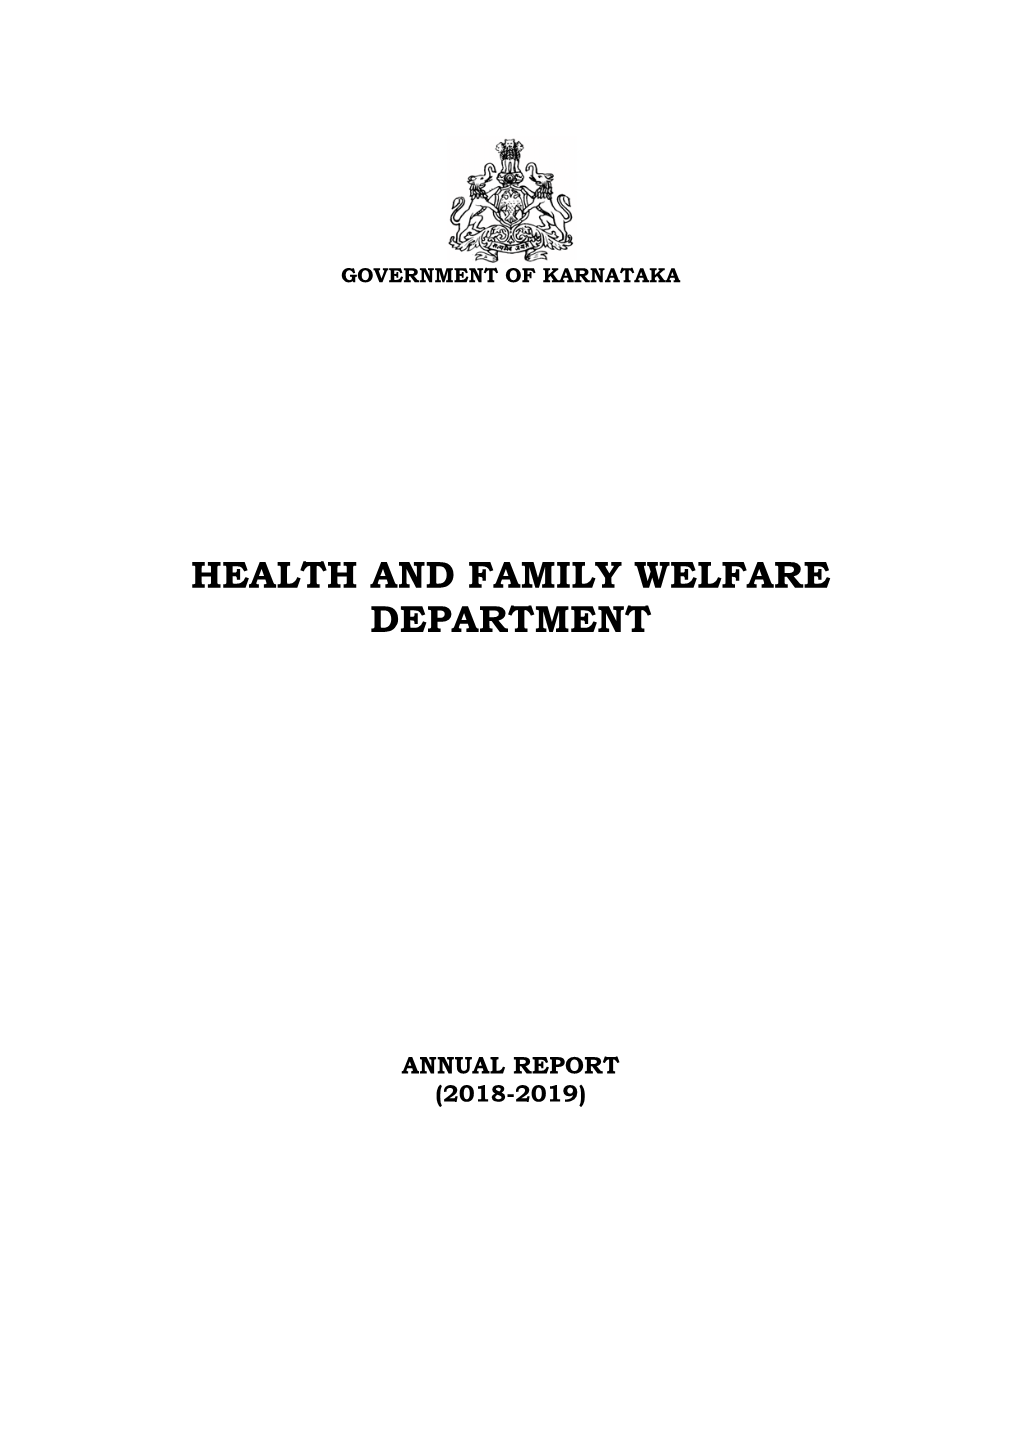 Health and Family Welfare Department